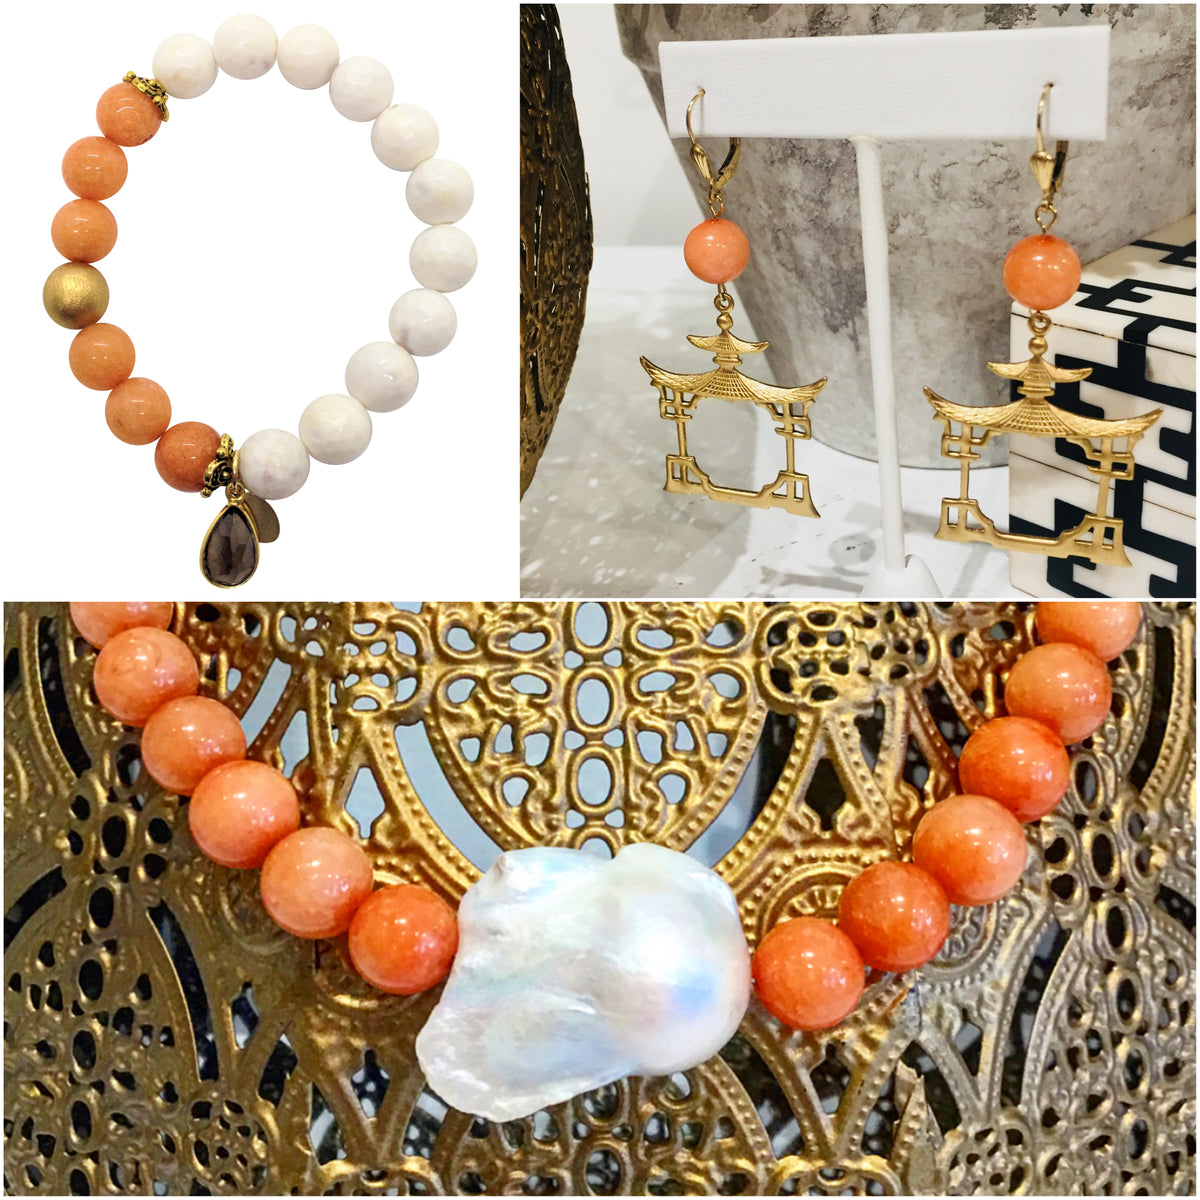 Monday Must-Haves: Gorgeous, Handmade Designer Coral Jewelry Inspiration from Teramasu